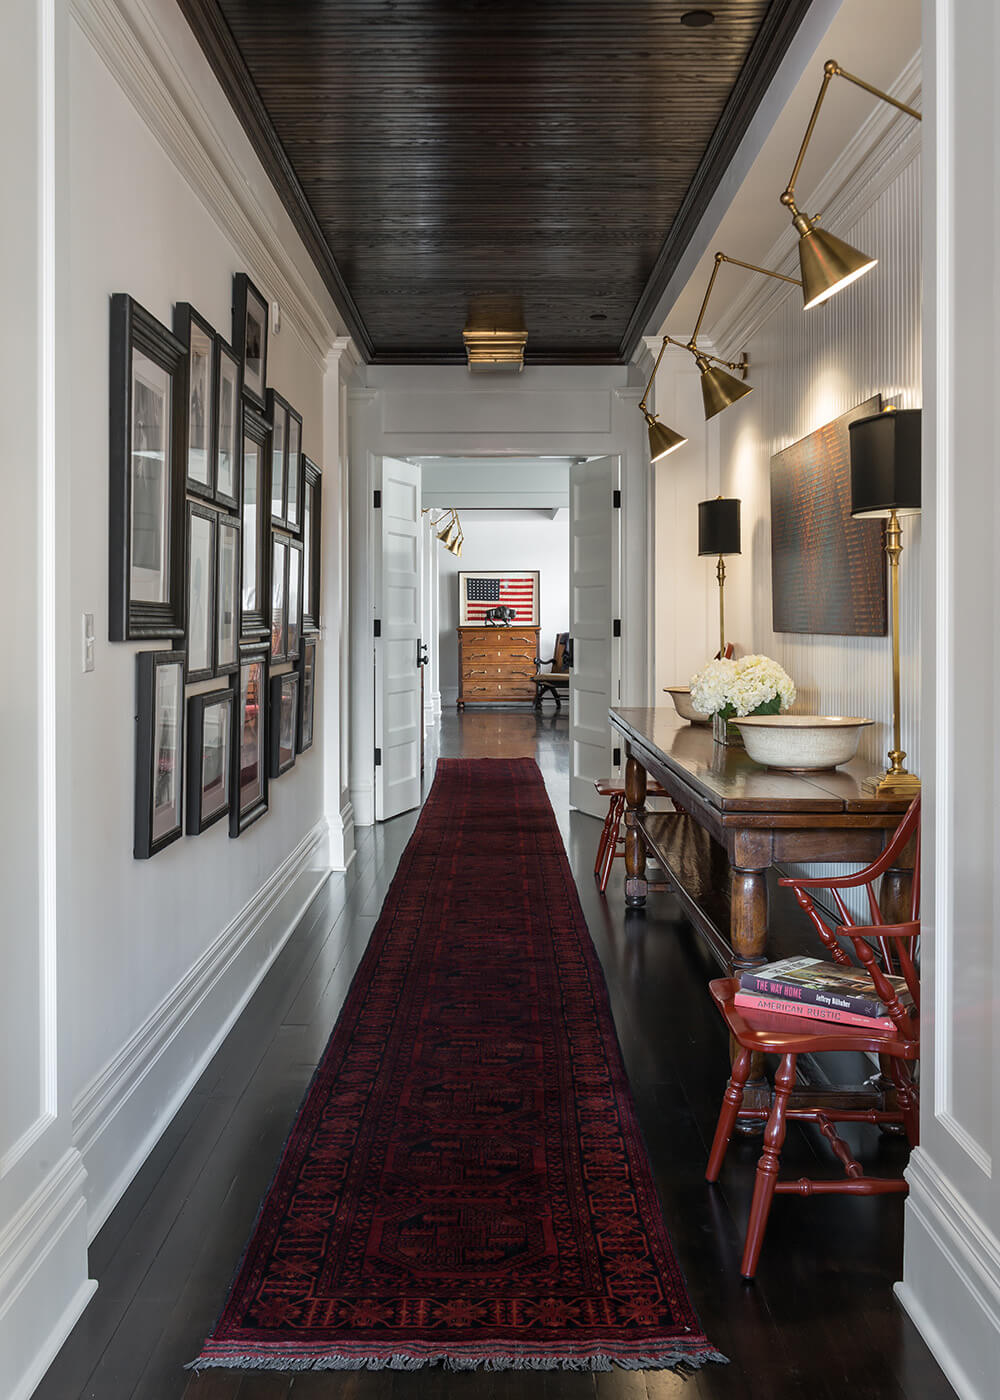 Hallway with framed art, wood console table, and long red patterned runner.